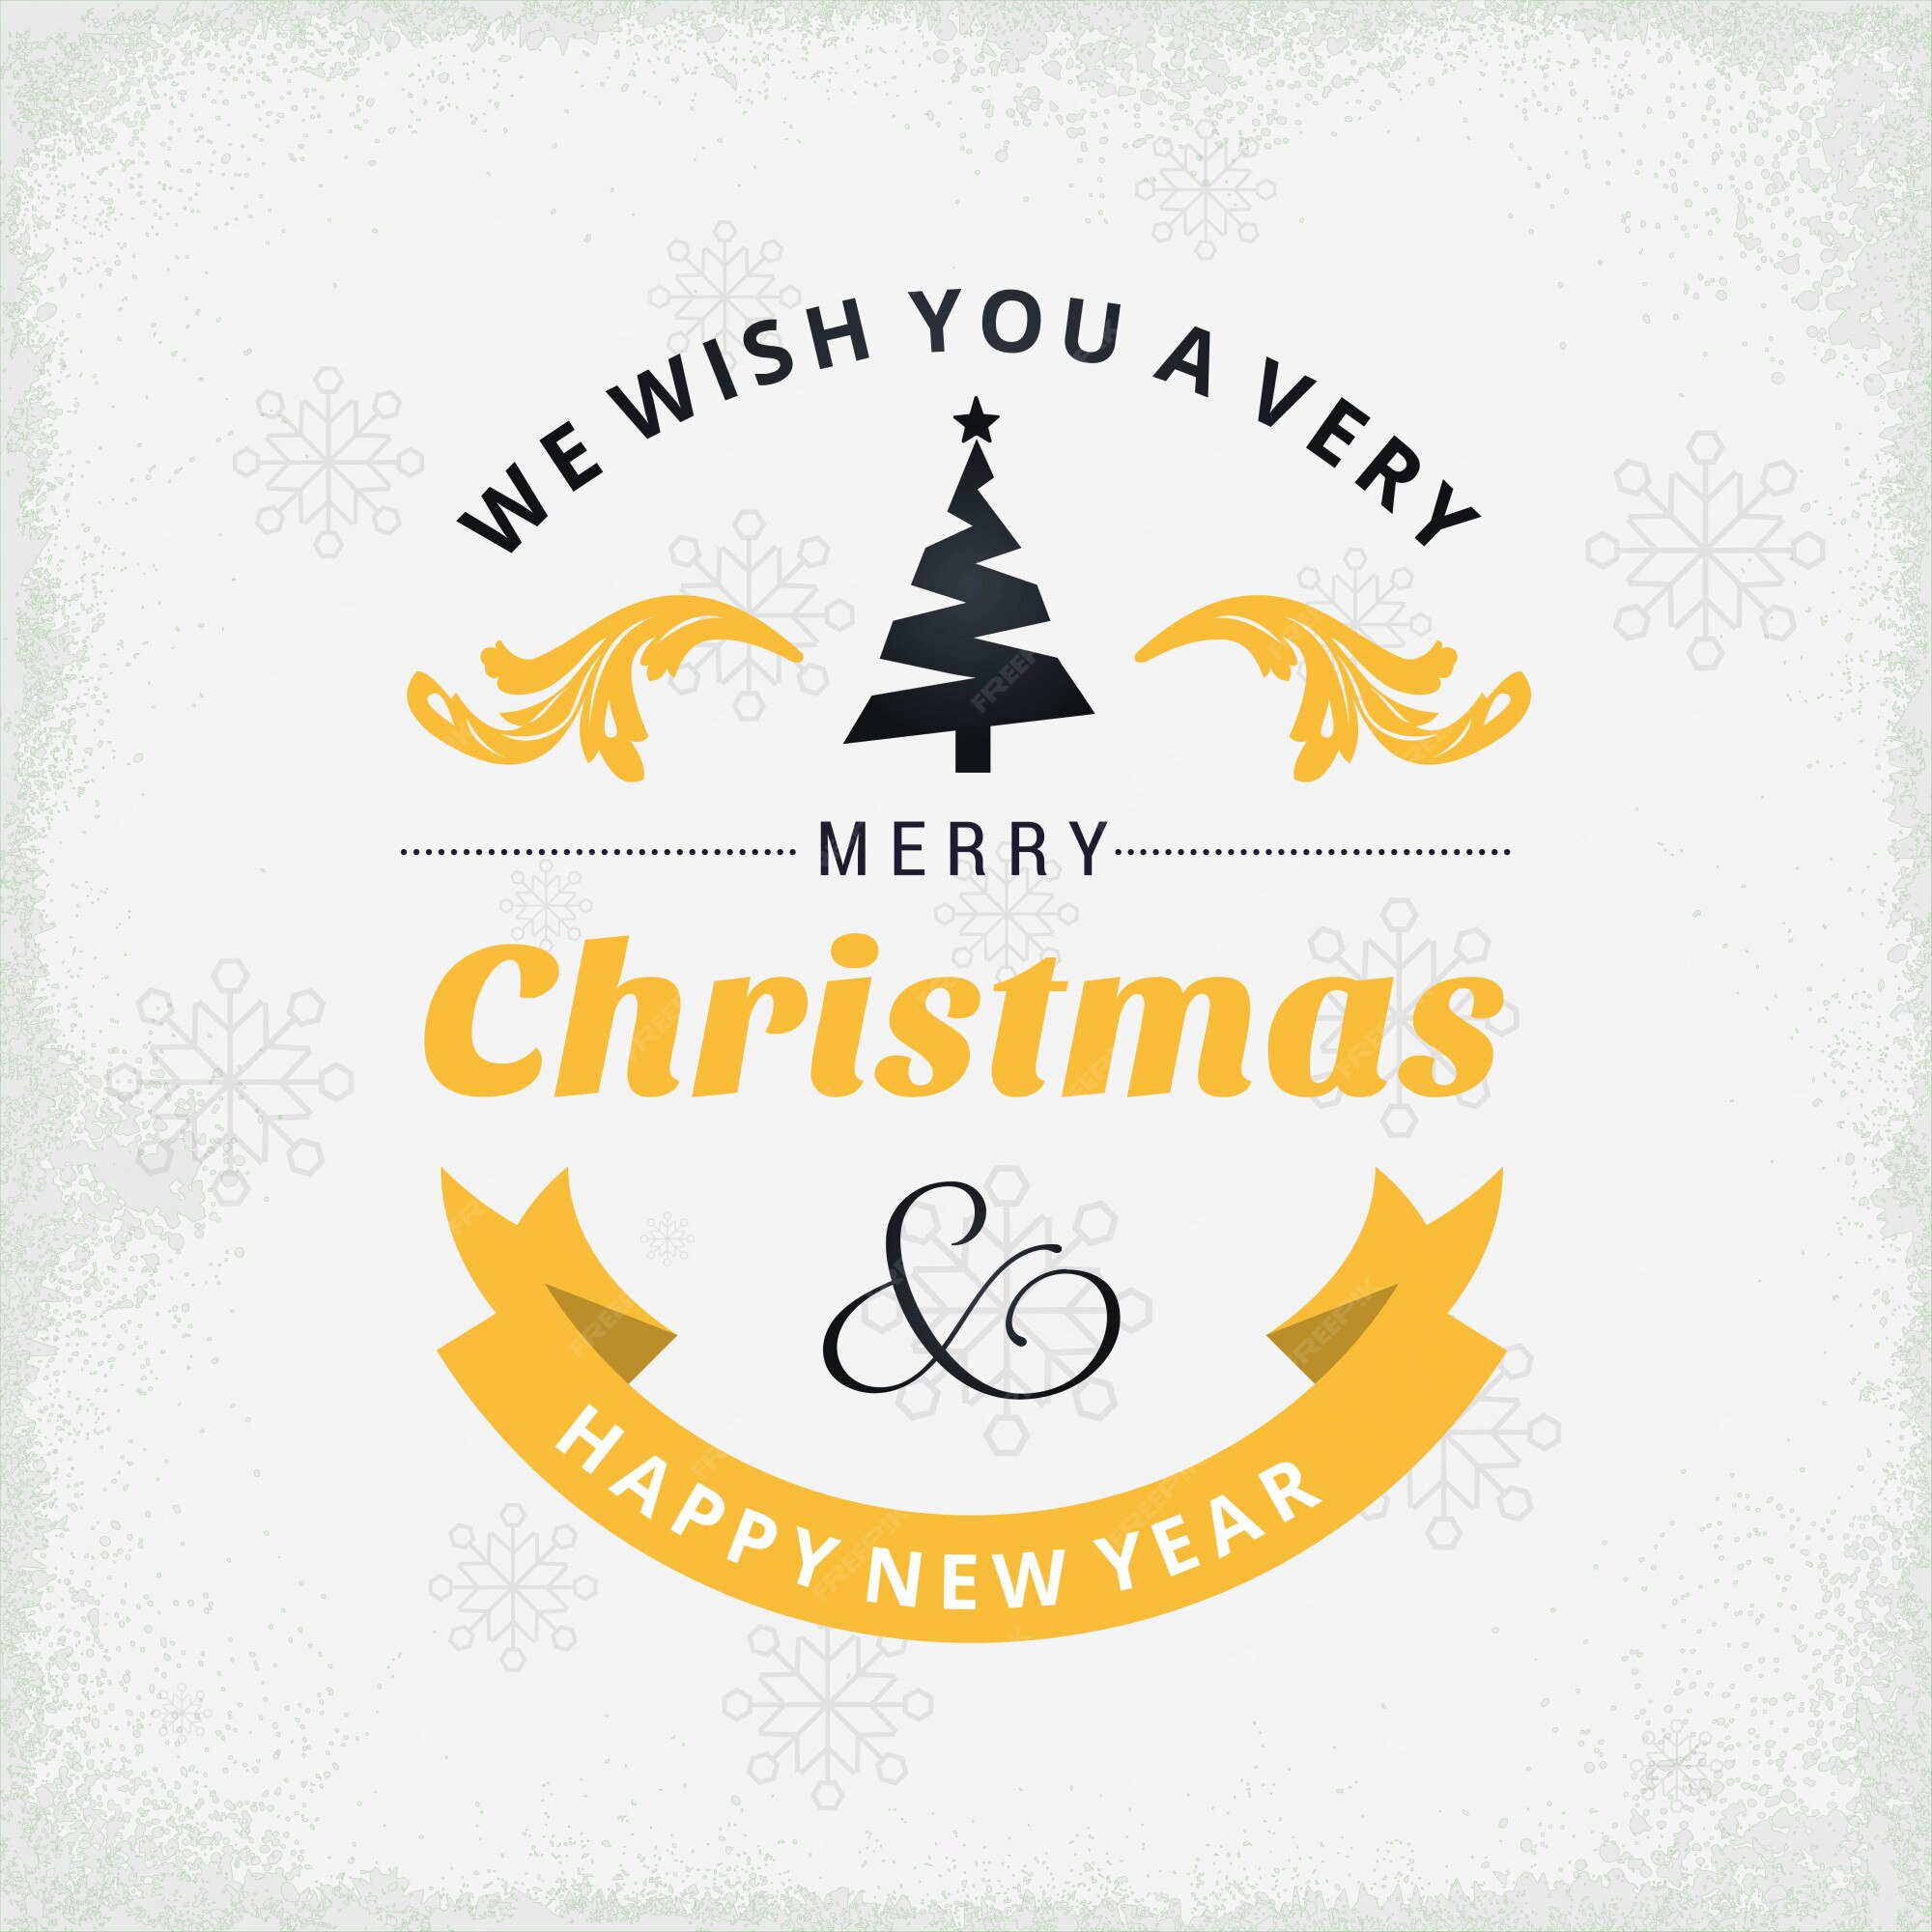 We wish you a merry christmas Vectors & Illustrations for Free Download |  Freepik